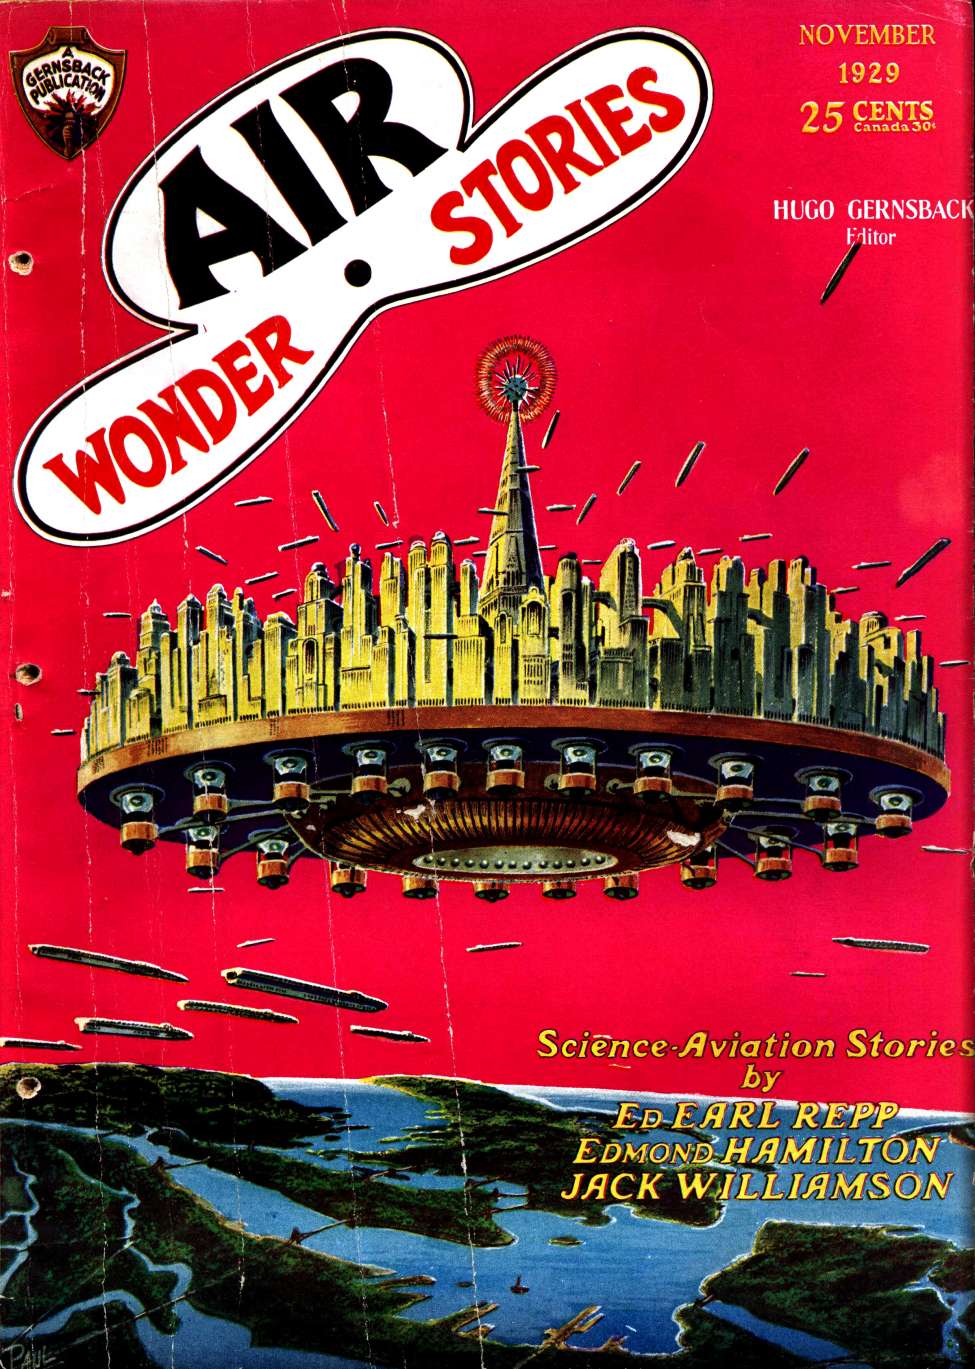 Comic Book Cover For Air Wonder Stories 5 - Cities in the Air - Edmond Hamilton